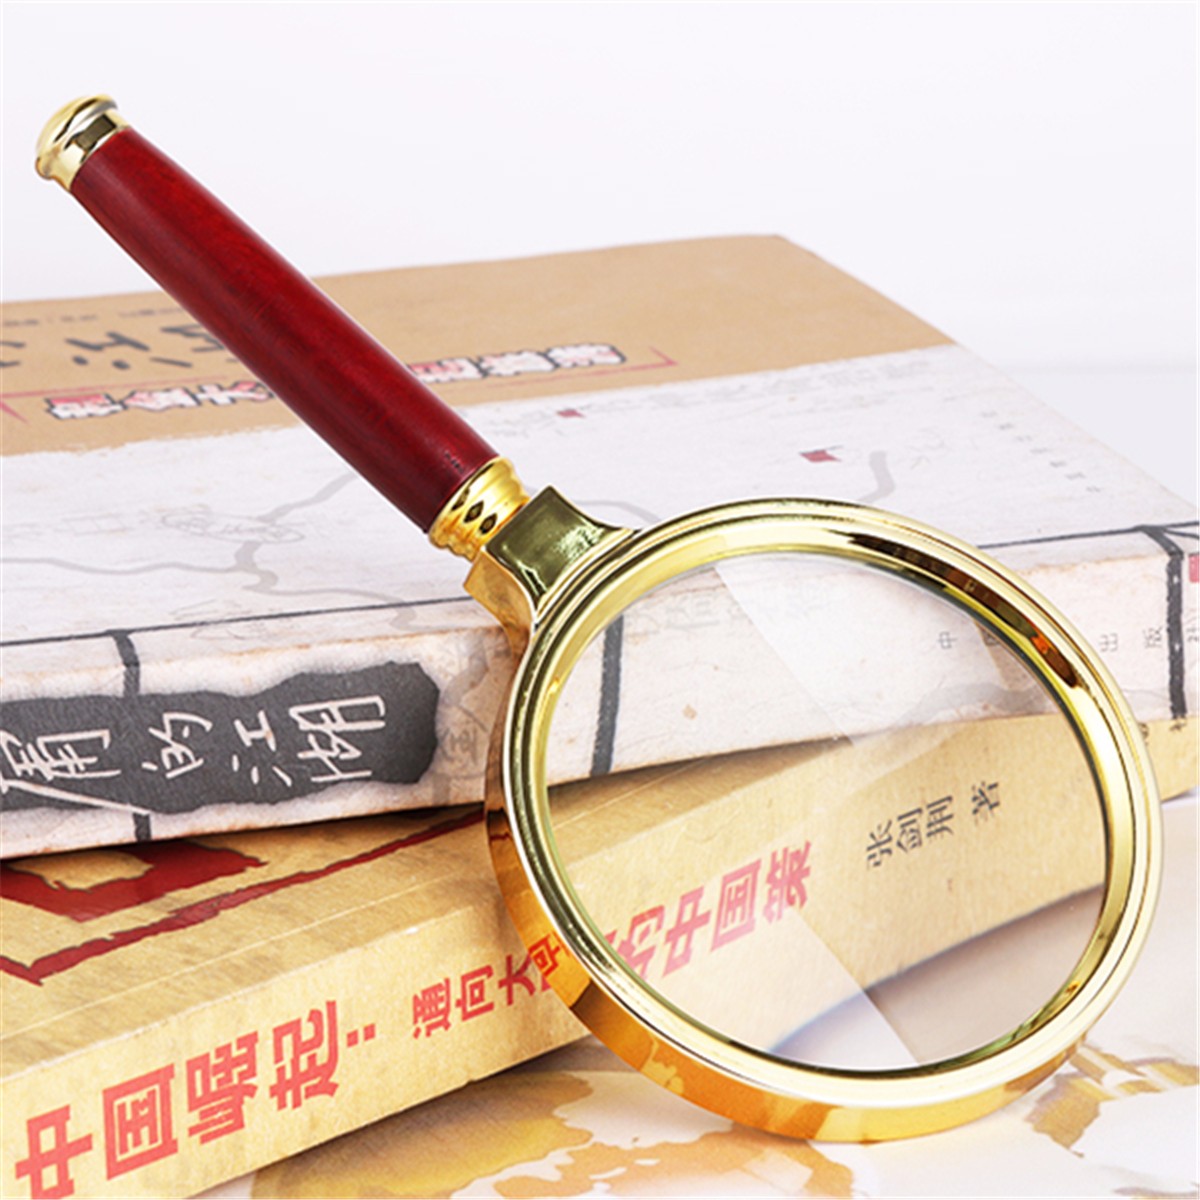 70mm-10X-Handheld-Magnifier-Magnifying-Glass-Loupe-Lens-for-Easy-Reading-Jewelry-1046079-8